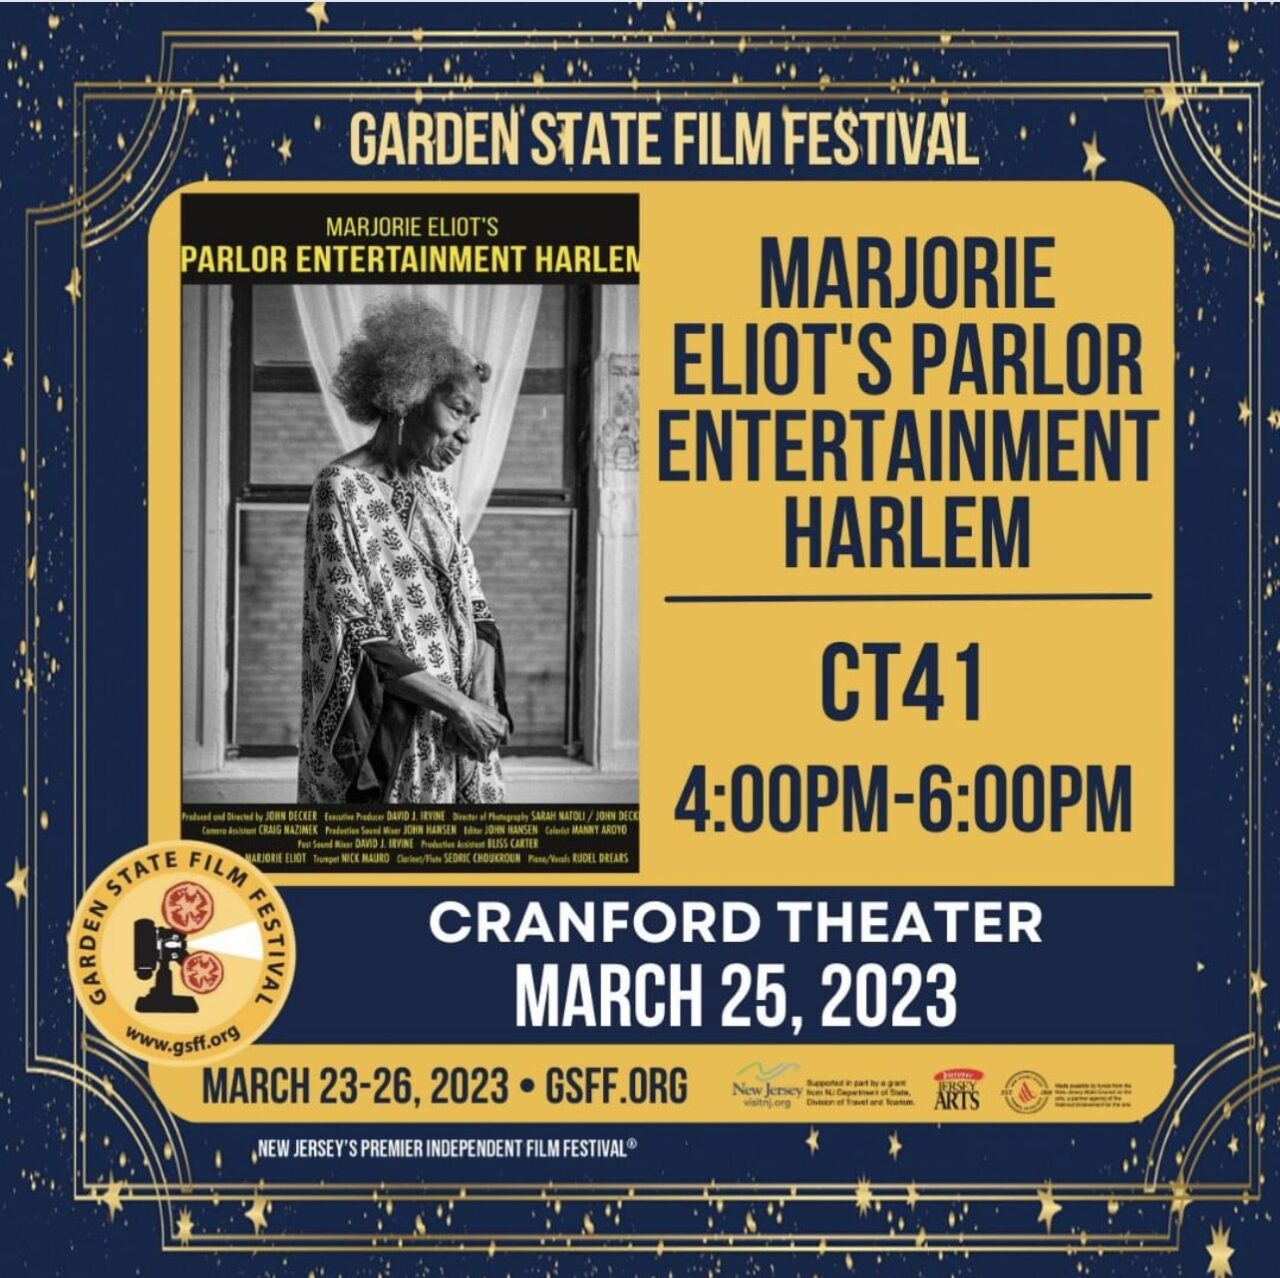 Garden Sate Film Festival, <strong>The Garden State Film Festival Returns to the Cranford Theater this Weekend!</strong>